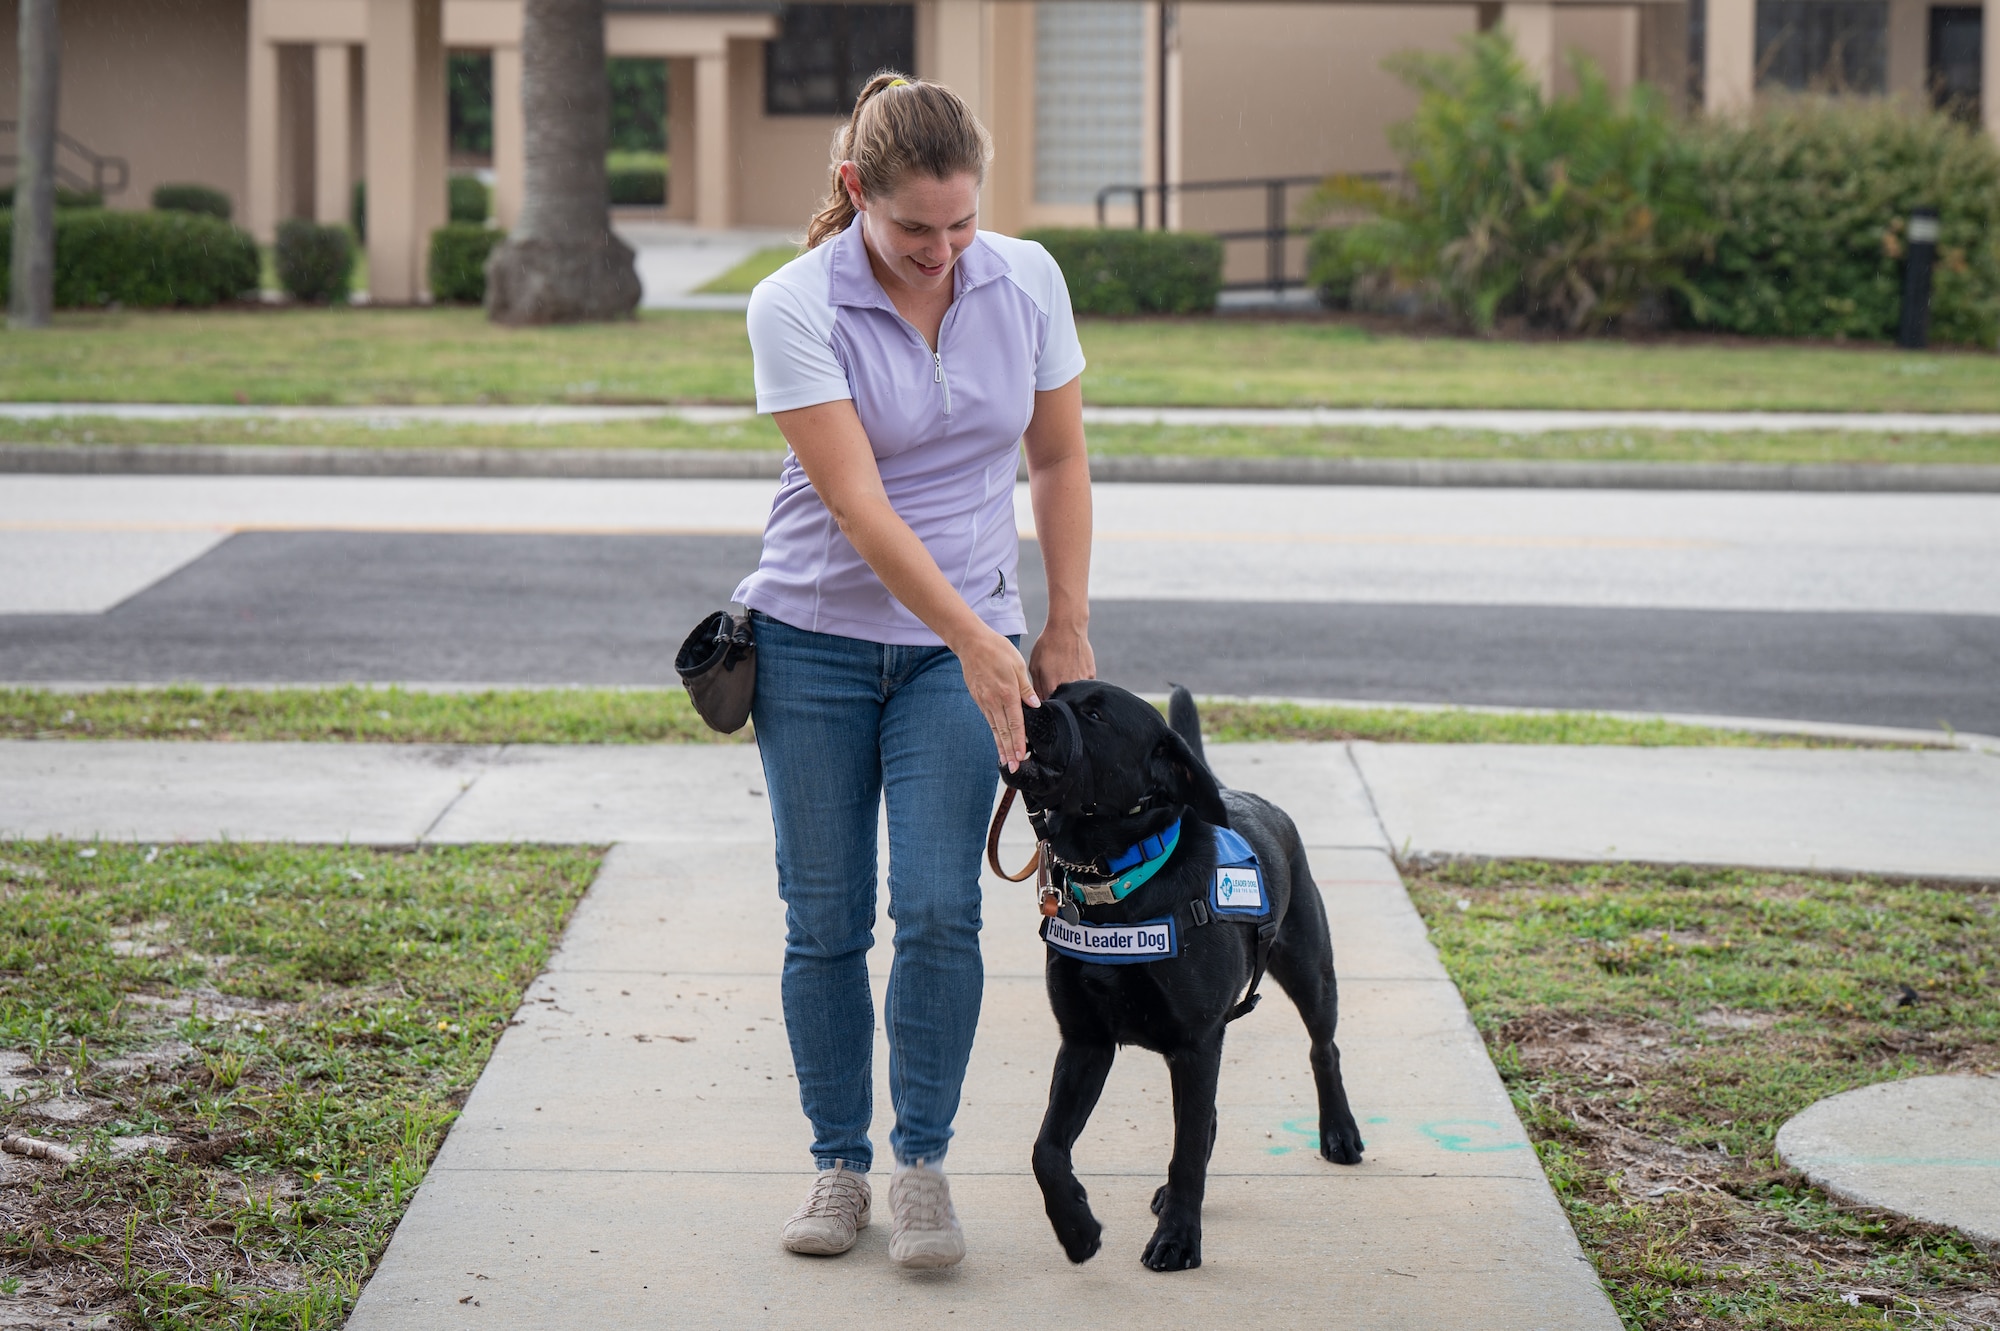 Kristen Chiodini-Fowler, Space Launch Delta 45 risk analyst, walks her guide-dog-in-training at Patrick Space Force Base, Fla., June 8, 2023. Kristen takes Comet on a walk to train him while also getting in some exercise. (U.S. Space Force photo by Senior Airman Dakota Raub)